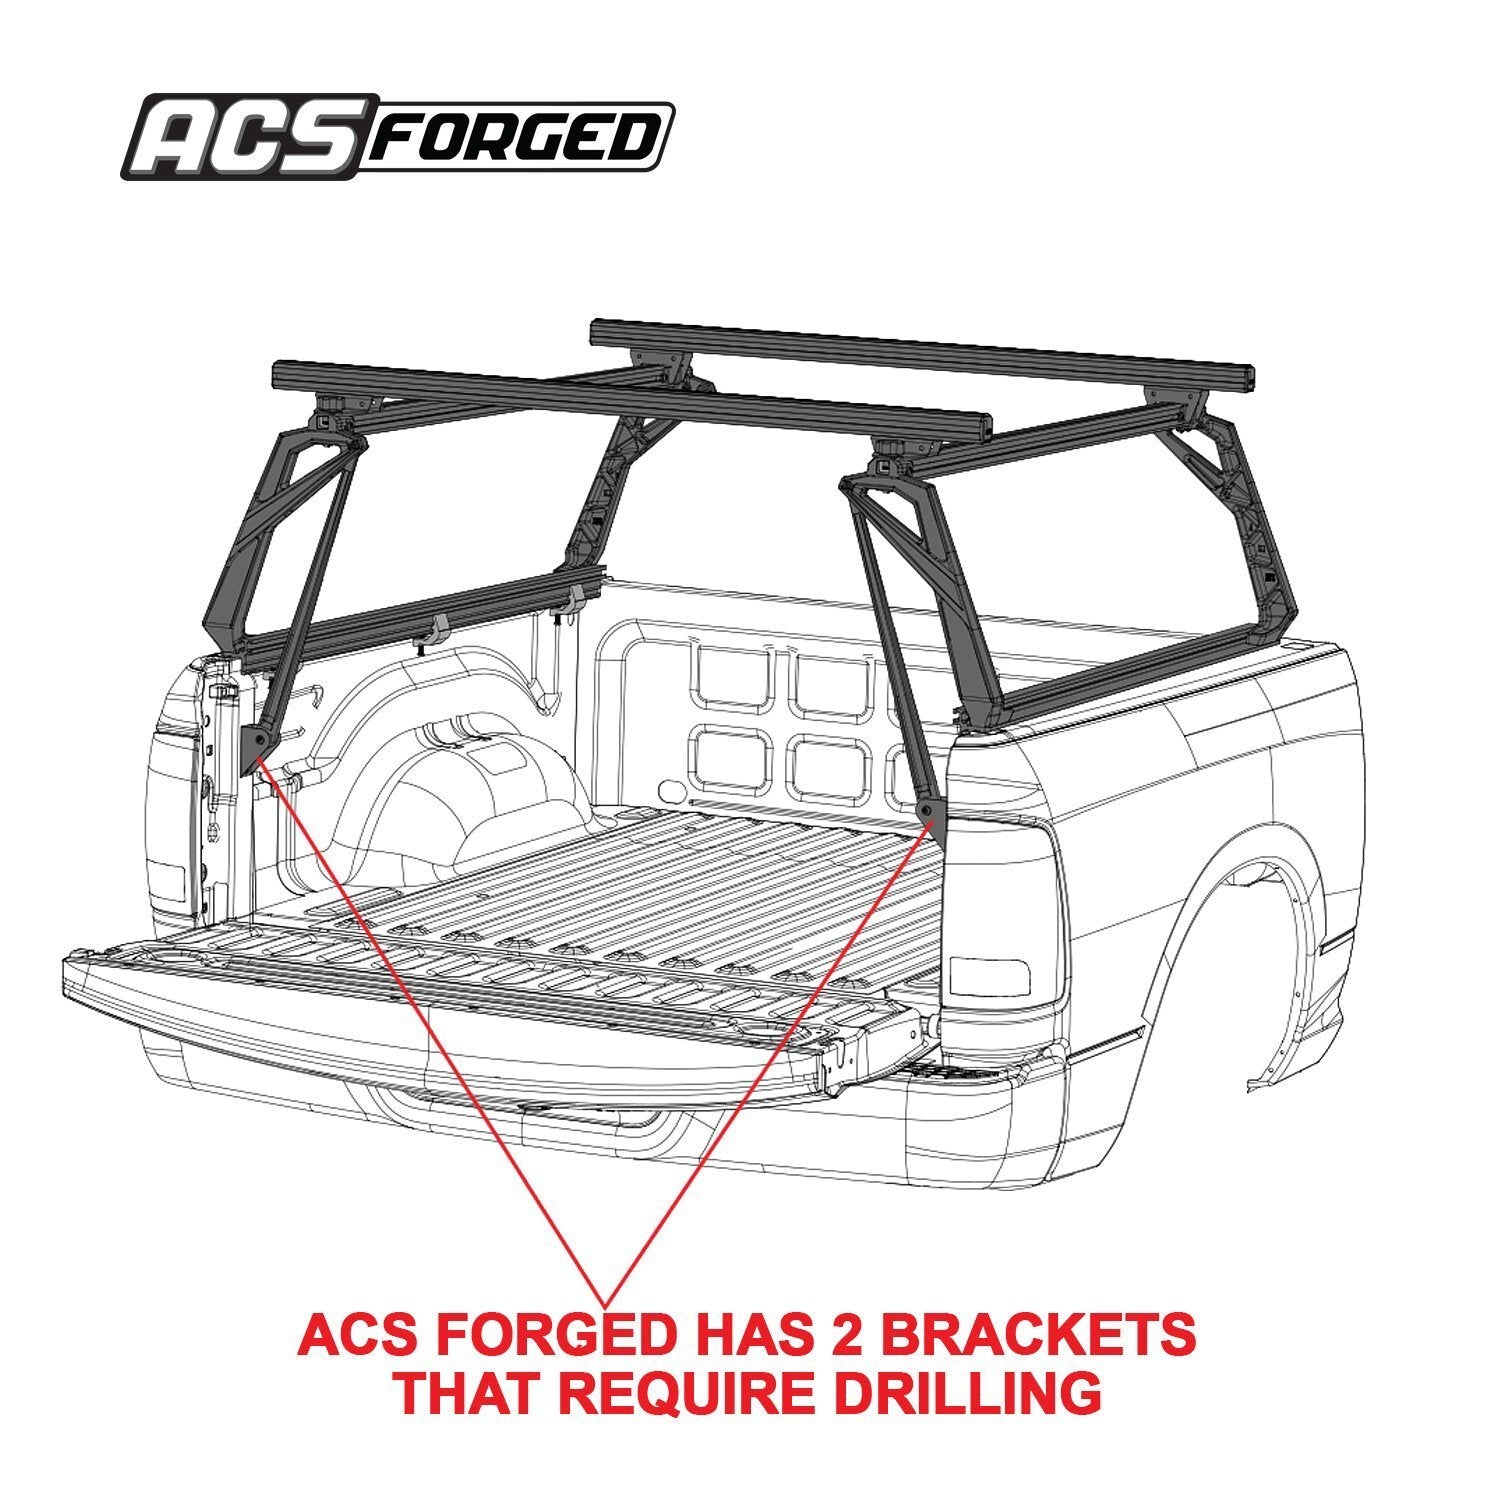 '17-23 Ford Raptor-ACS Forged Bed Accessories Leitner Designs design